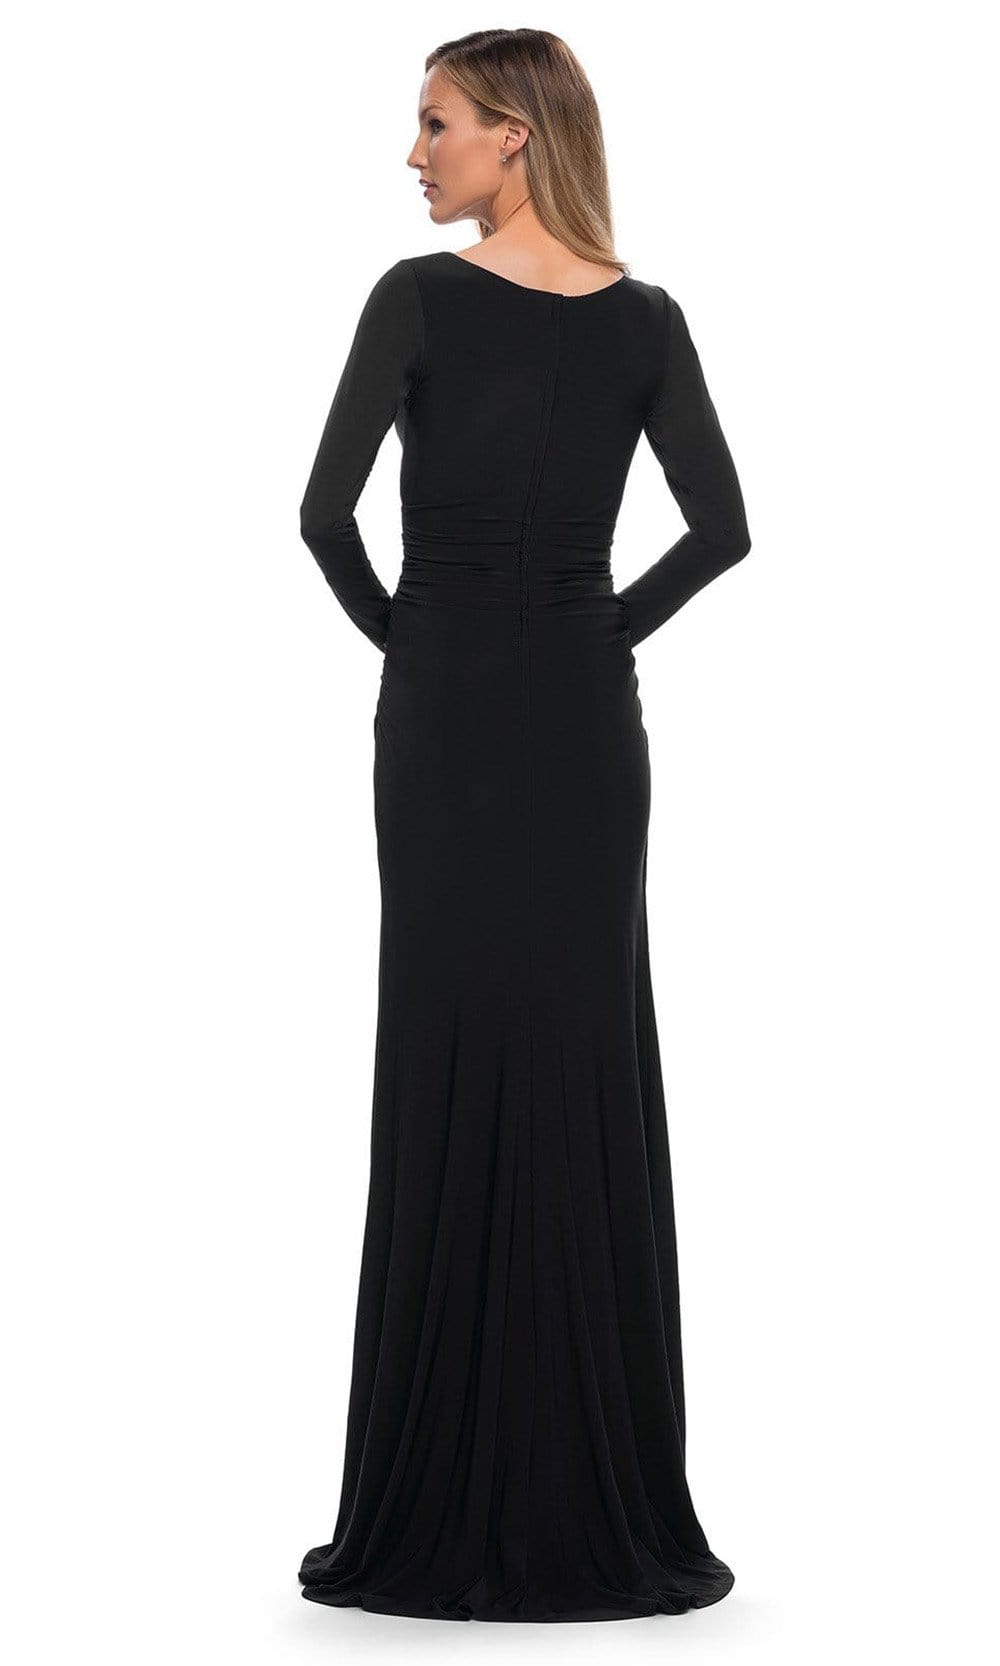 La Femme - 29924 Fitted Sheath Evening Dress Mother of the Bride Dresses